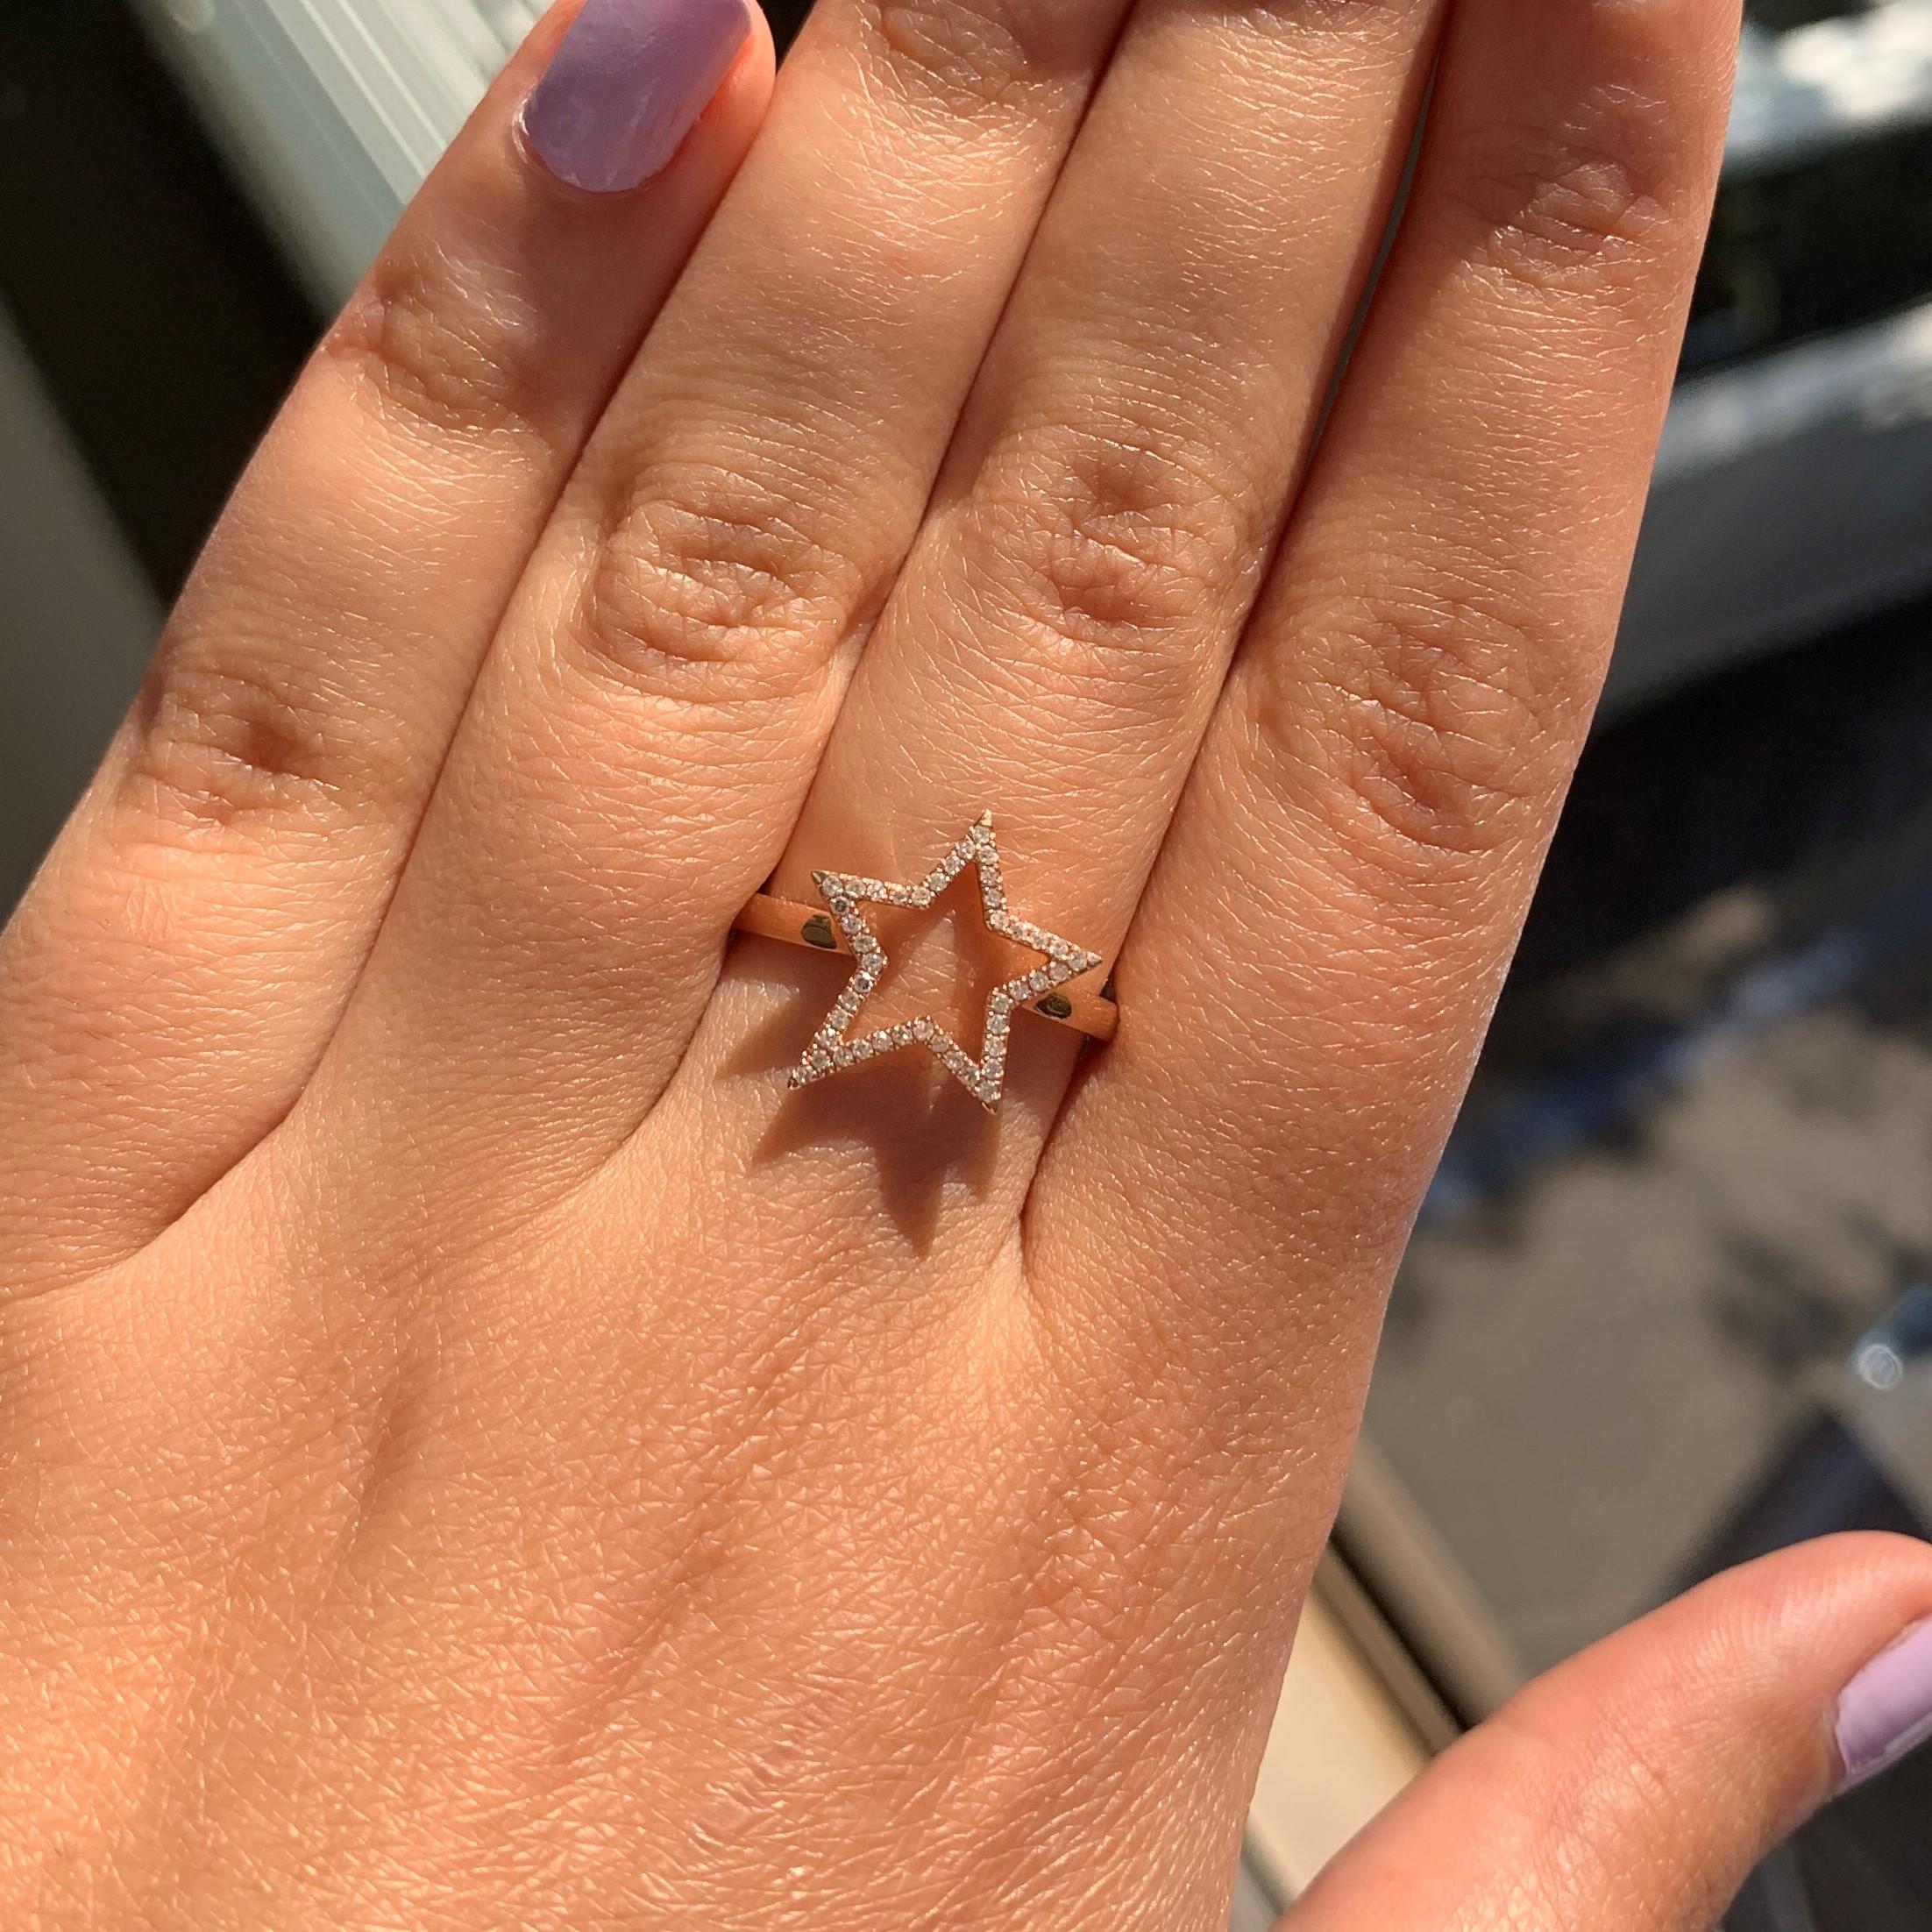 Crafted of 14k gold and available in 3 gold colors, this trendy yet classic Star design ring features approximately 0.14 ct of shimmering round diamonds. Diamond Color and Clarity is GH SI1-SI2.
-14K Gold
-0.14cts White Diamonds
-Diamond Color